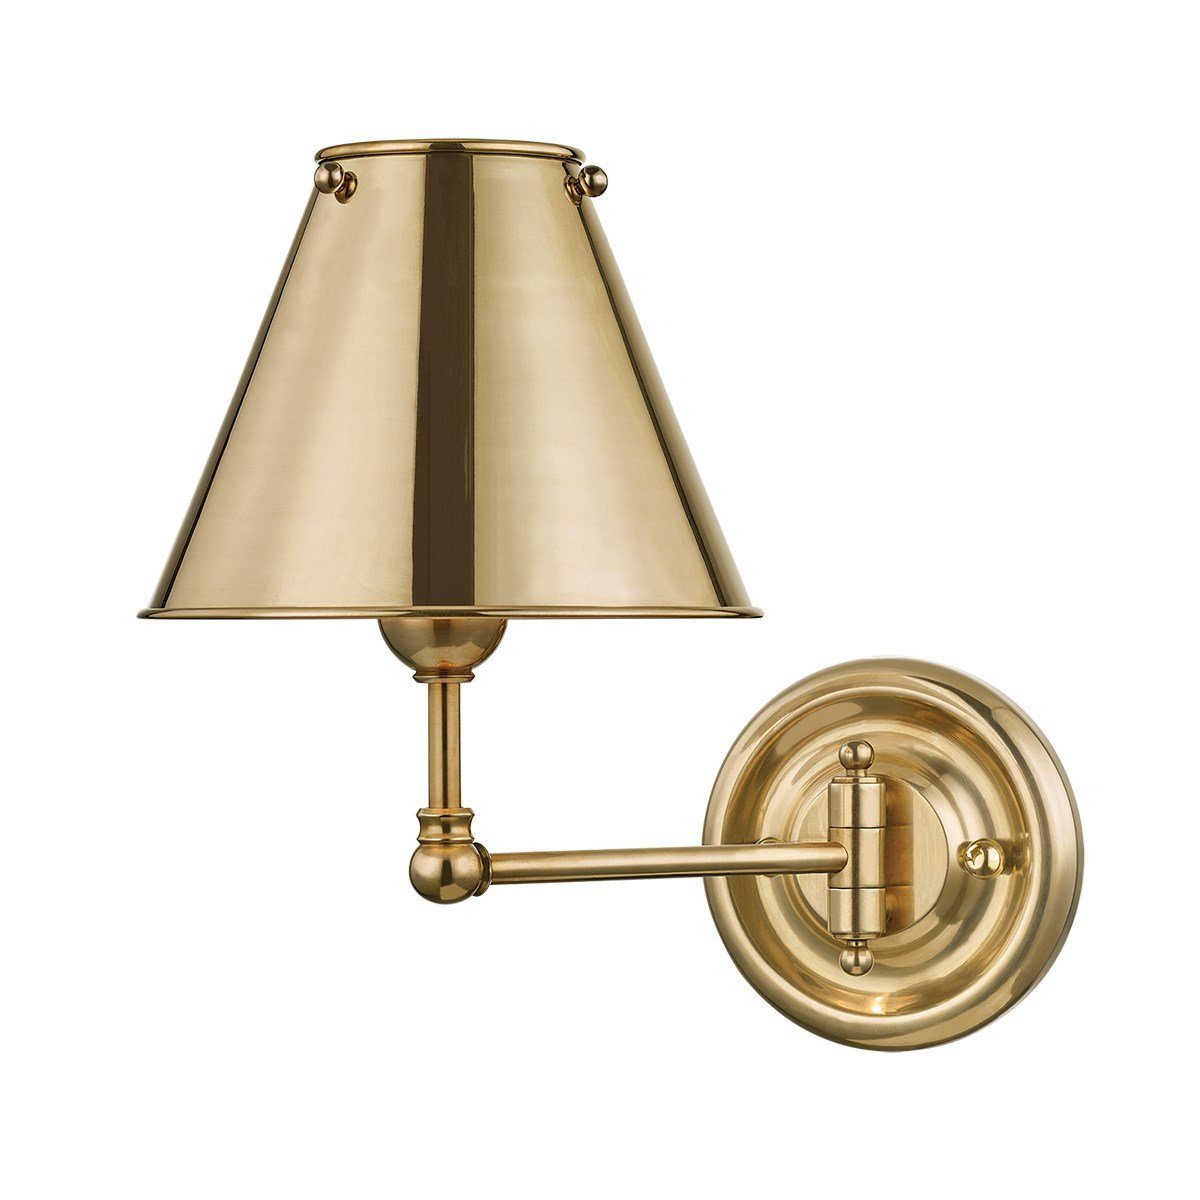 Classic Single Sconce Aged Brass. Front view.